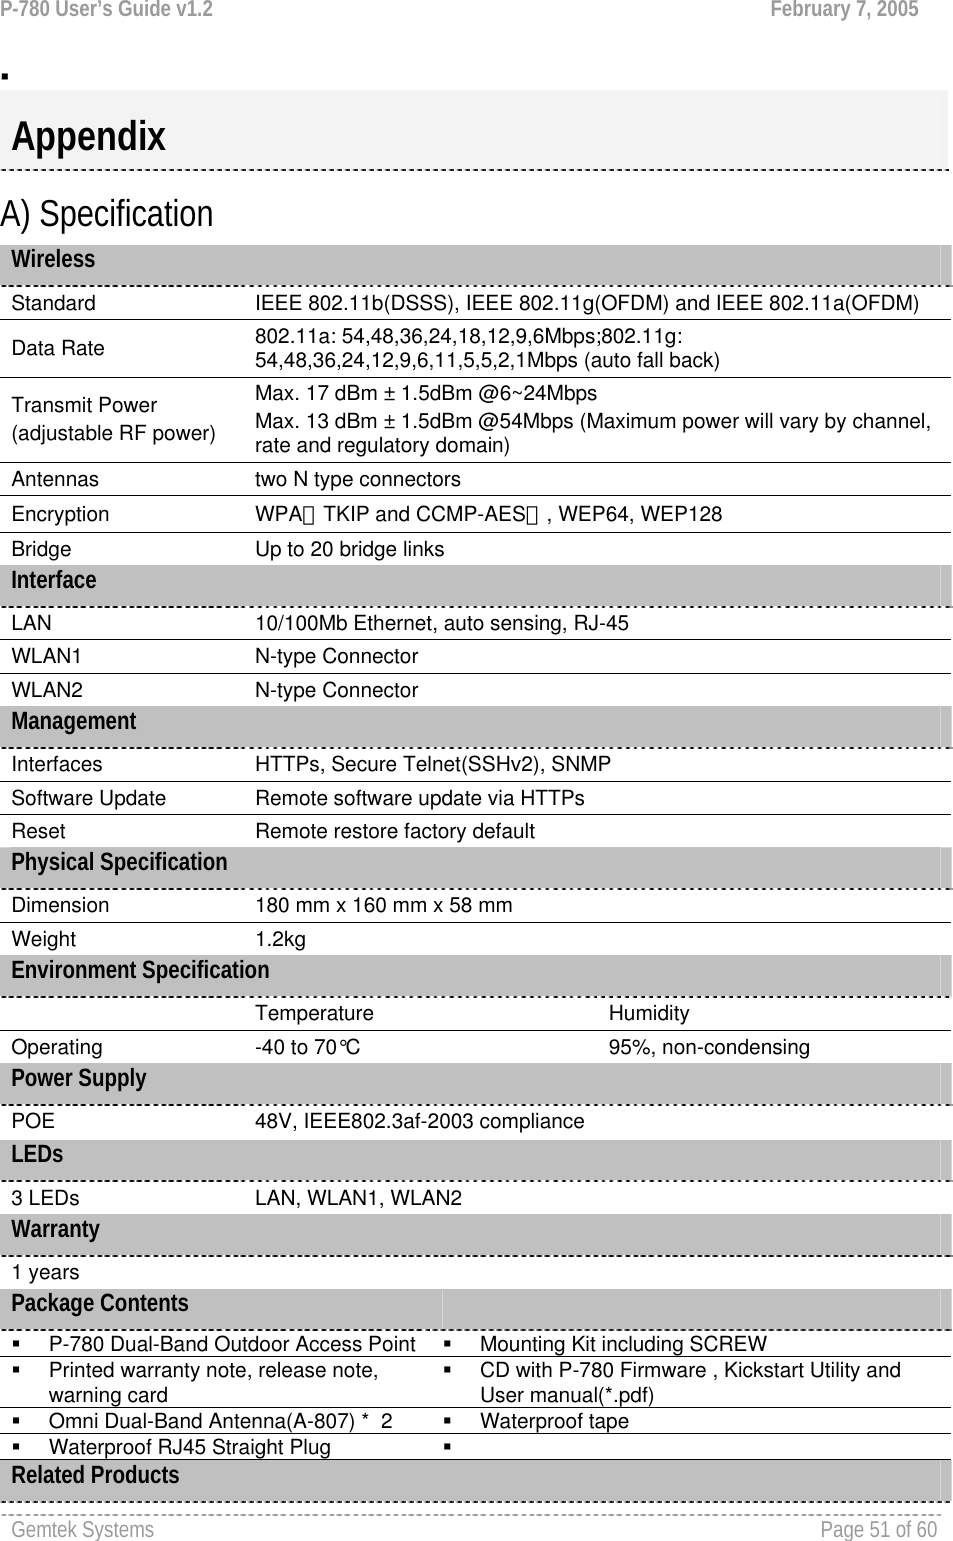 P-780 User’s Guide v1.2  February 7, 2005 Gemtek Systems    Page 51 of 60     A) Specification Wireless Standard  IEEE 802.11b(DSSS), IEEE 802.11g(OFDM) and IEEE 802.11a(OFDM) Data Rate  802.11a: 54,48,36,24,18,12,9,6Mbps;802.11g: 54,48,36,24,12,9,6,11,5,5,2,1Mbps (auto fall back) Transmit Power (adjustable RF power) Max. 17 dBm ± 1.5dBm @6~24Mbps Max. 13 dBm ± 1.5dBm @54Mbps (Maximum power will vary by channel, rate and regulatory domain) Antennas  two N type connectors Encryption  WPA（TKIP and CCMP-AES）, WEP64, WEP128 Bridge   Up to 20 bridge links Interface LAN  10/100Mb Ethernet, auto sensing, RJ-45 WLAN1  N-type Connector WLAN2  N-type Connector Management Interfaces  HTTPs, Secure Telnet(SSHv2), SNMP Software Update  Remote software update via HTTPs Reset  Remote restore factory default Physical Specification Dimension   180 mm x 160 mm x 58 mm  Weight  1.2kg Environment Specification  Temperature  Humidity Operating  -40 to 70°C  95%, non-condensing Power Supply POE  48V, IEEE802.3af-2003 compliance LEDs 3 LEDs  LAN, WLAN1, WLAN2   Warranty 1 years Package Contents     P-780 Dual-Band Outdoor Access Point   Mounting Kit including SCREW   Printed warranty note, release note, warning card   CD with P-780 Firmware , Kickstart Utility and User manual(*.pdf)   Omni Dual-Band Antenna(A-807) *  2   Waterproof tape   Waterproof RJ45 Straight Plug    Related Products Appendix 